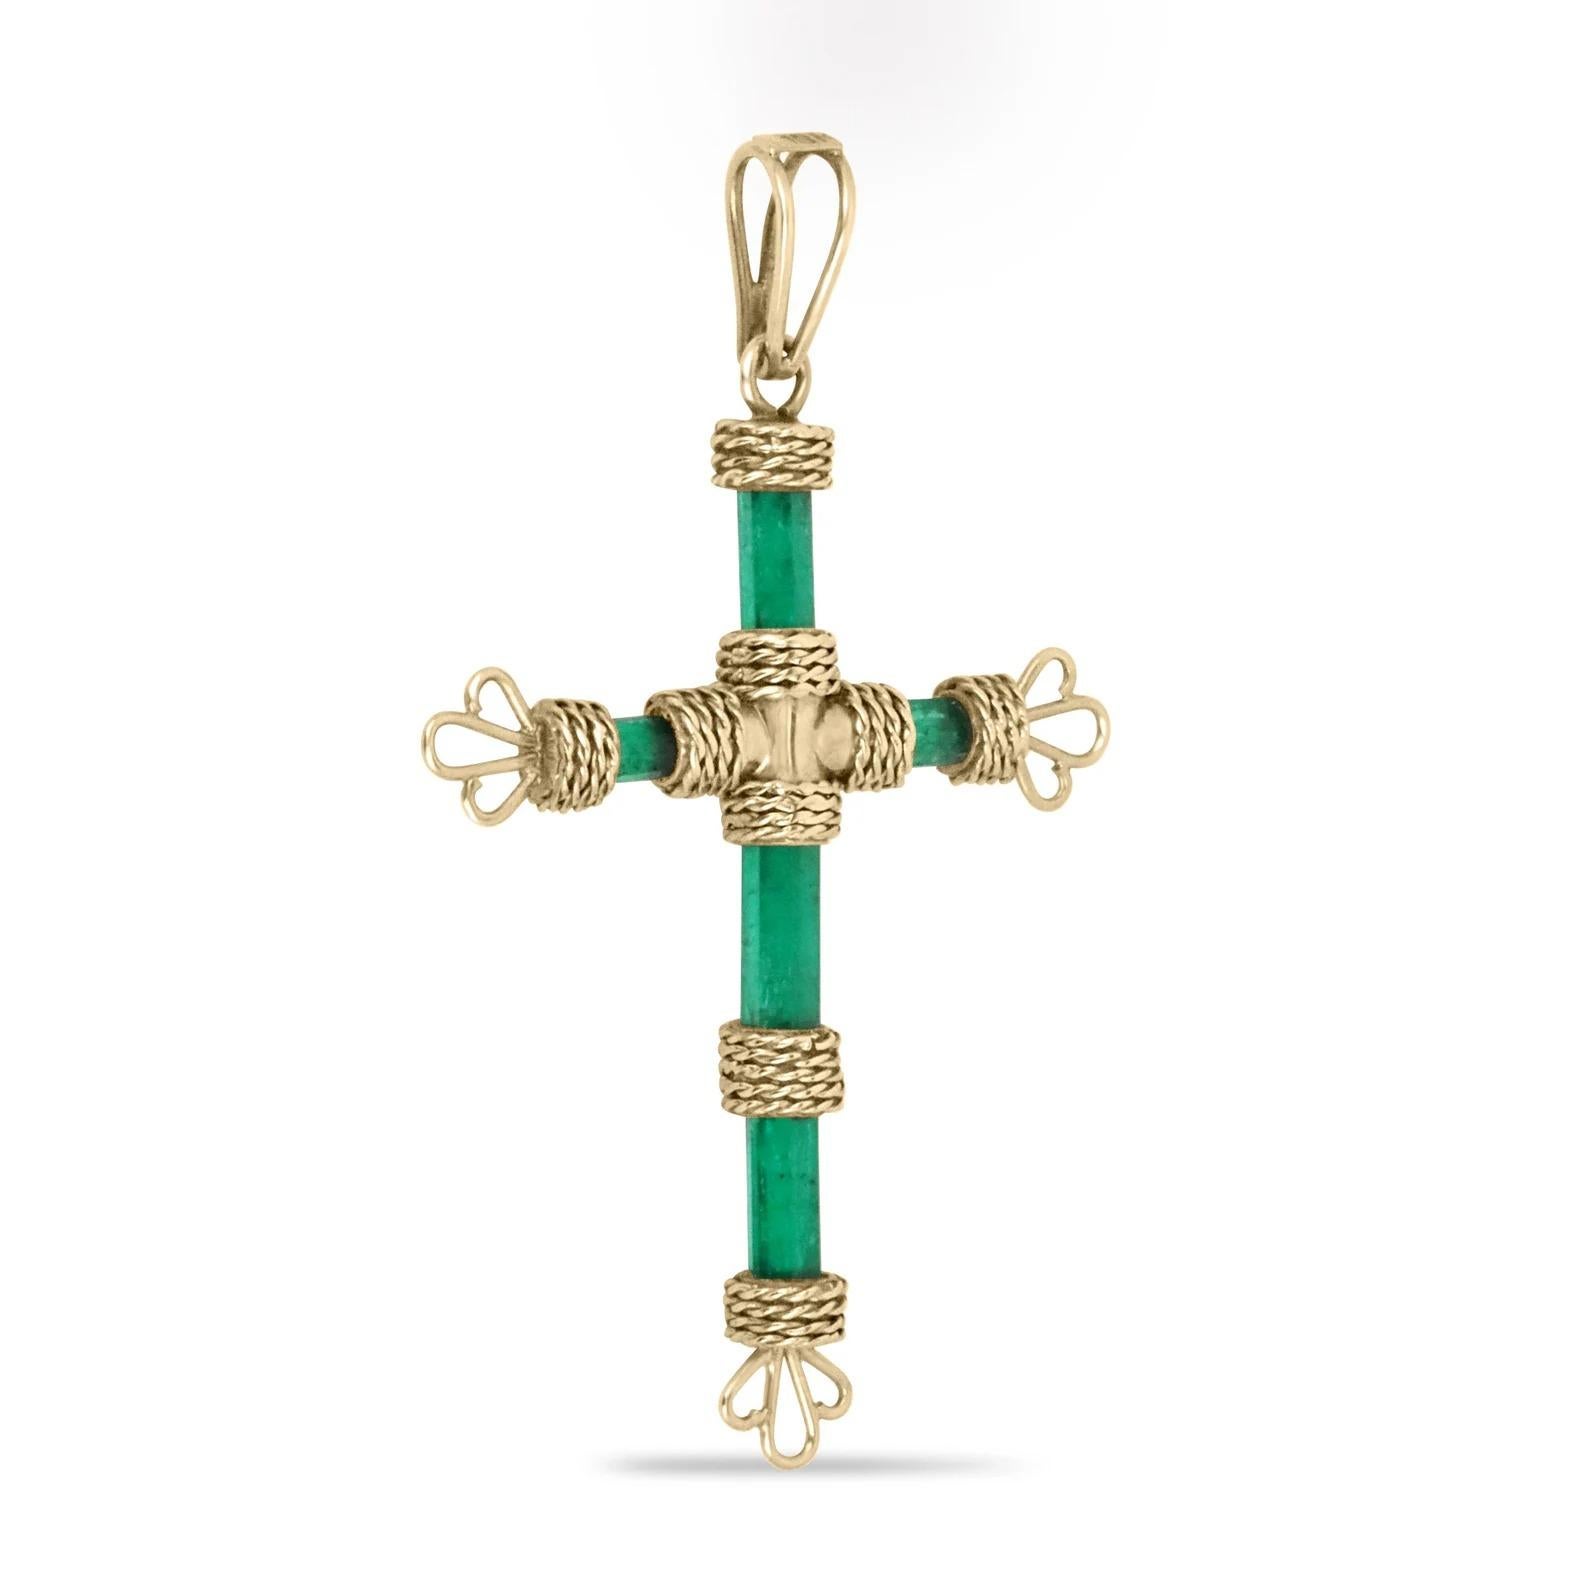 A unique and special emerald cross from the 